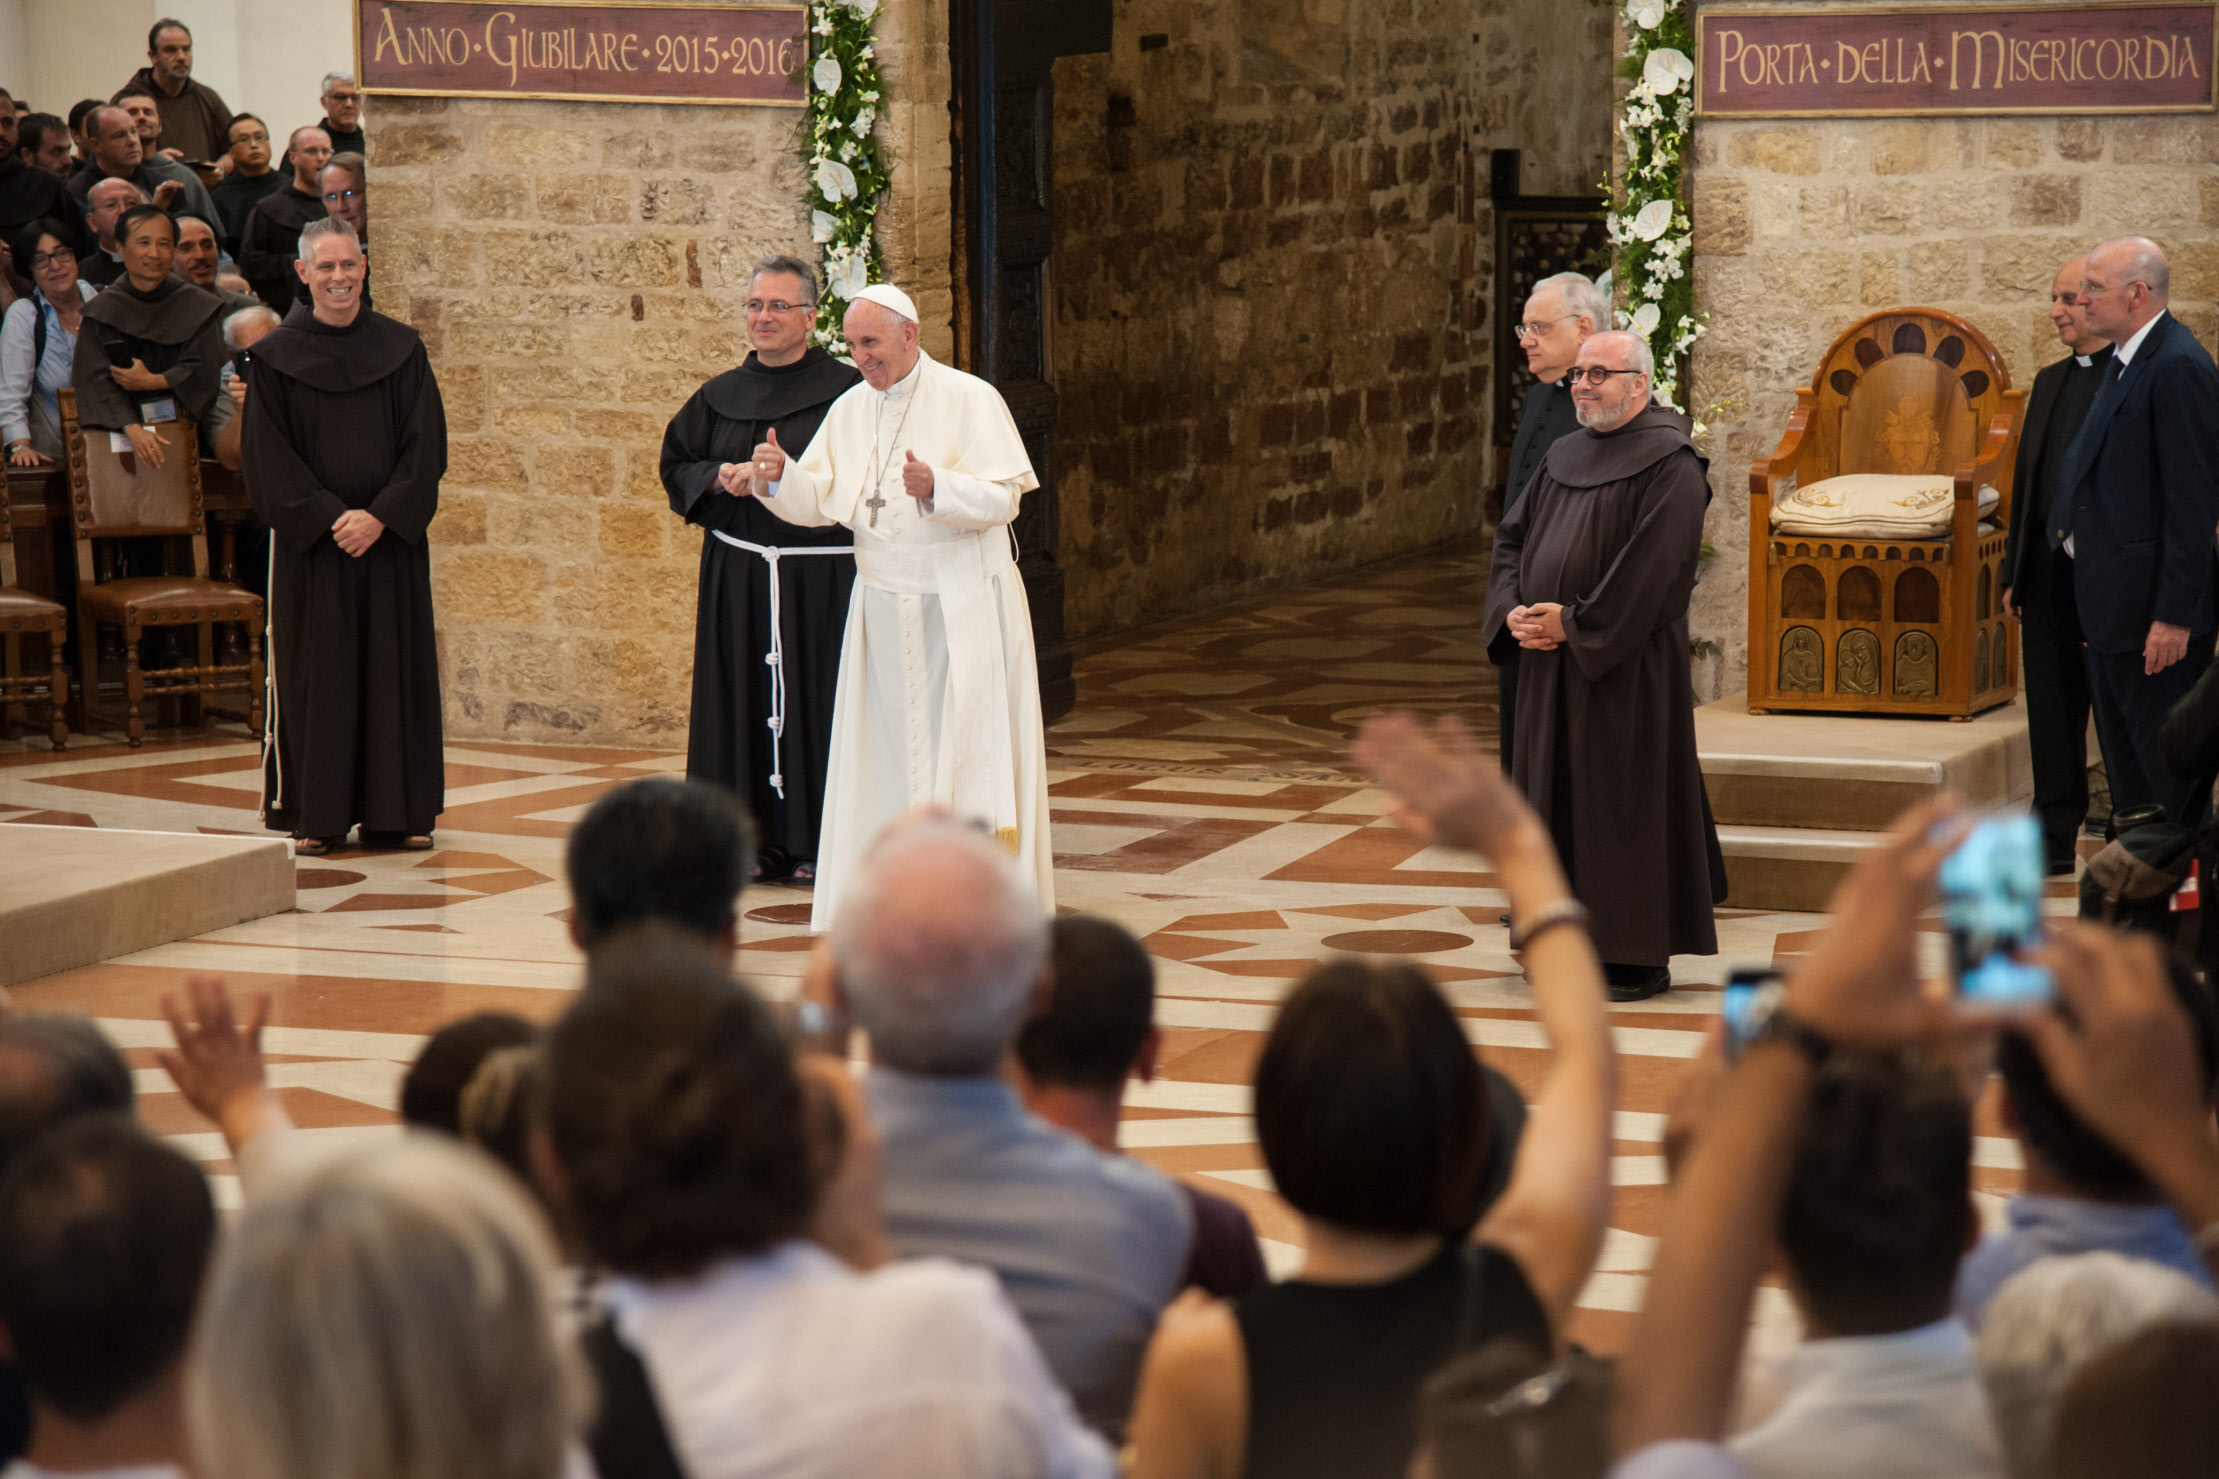 August 05 2016 : Pope Francis greets faithful in Saint Mary of Angels Basilica in the Italian pilgrimage town of Assisi on the occasion of the VIII Centenary of the Pardon of Assisi.